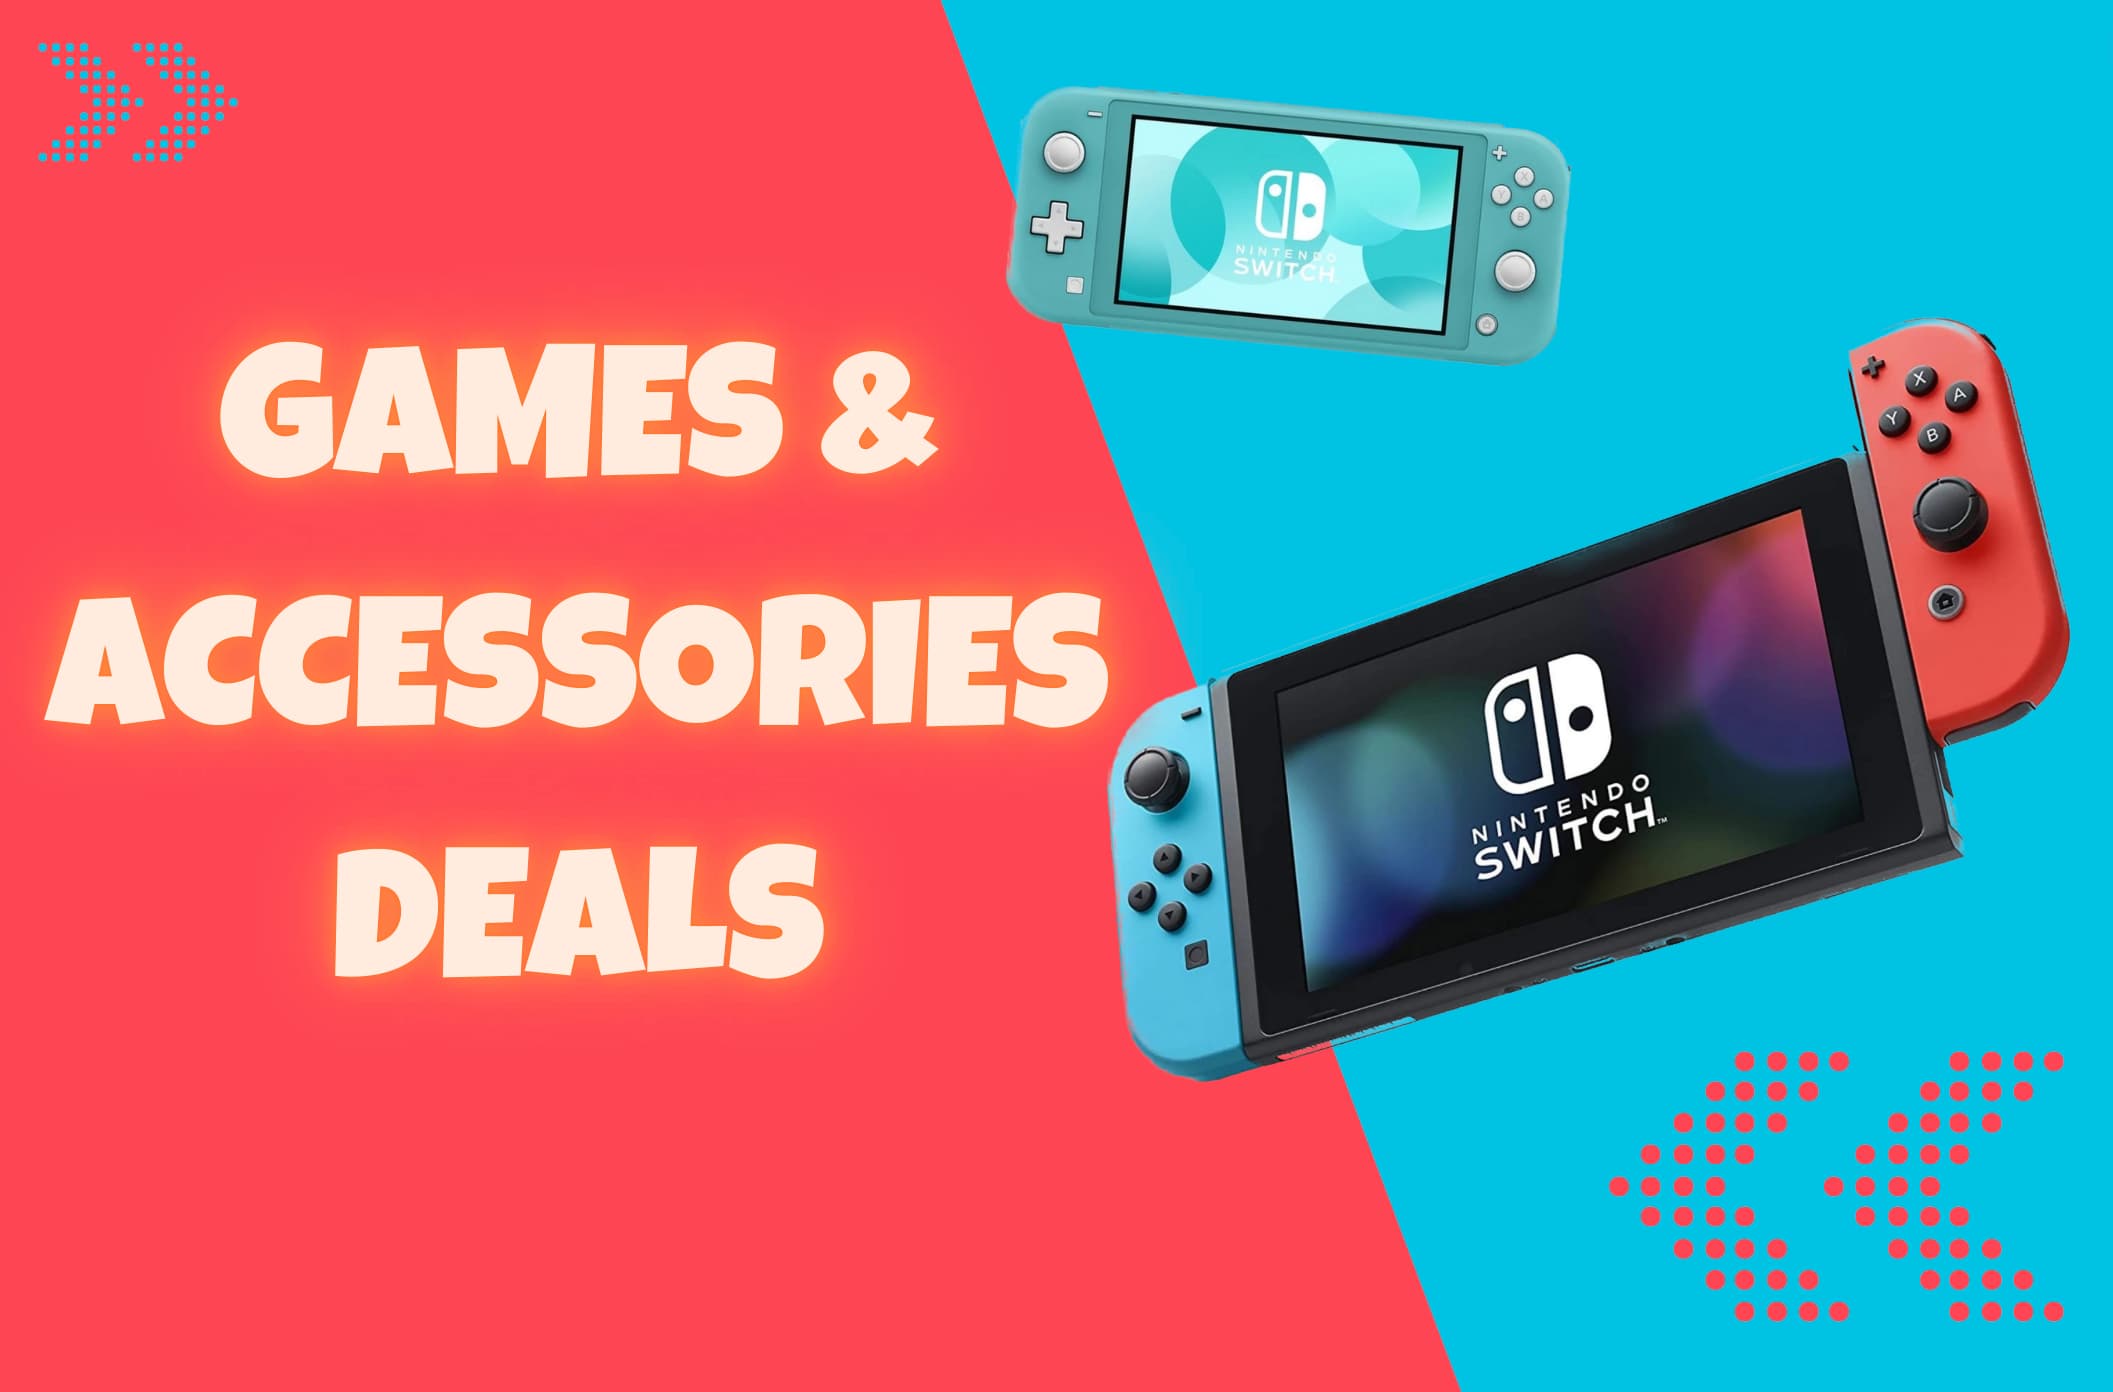 Enrich your September with these penny-pinching Nintendo Switch deals